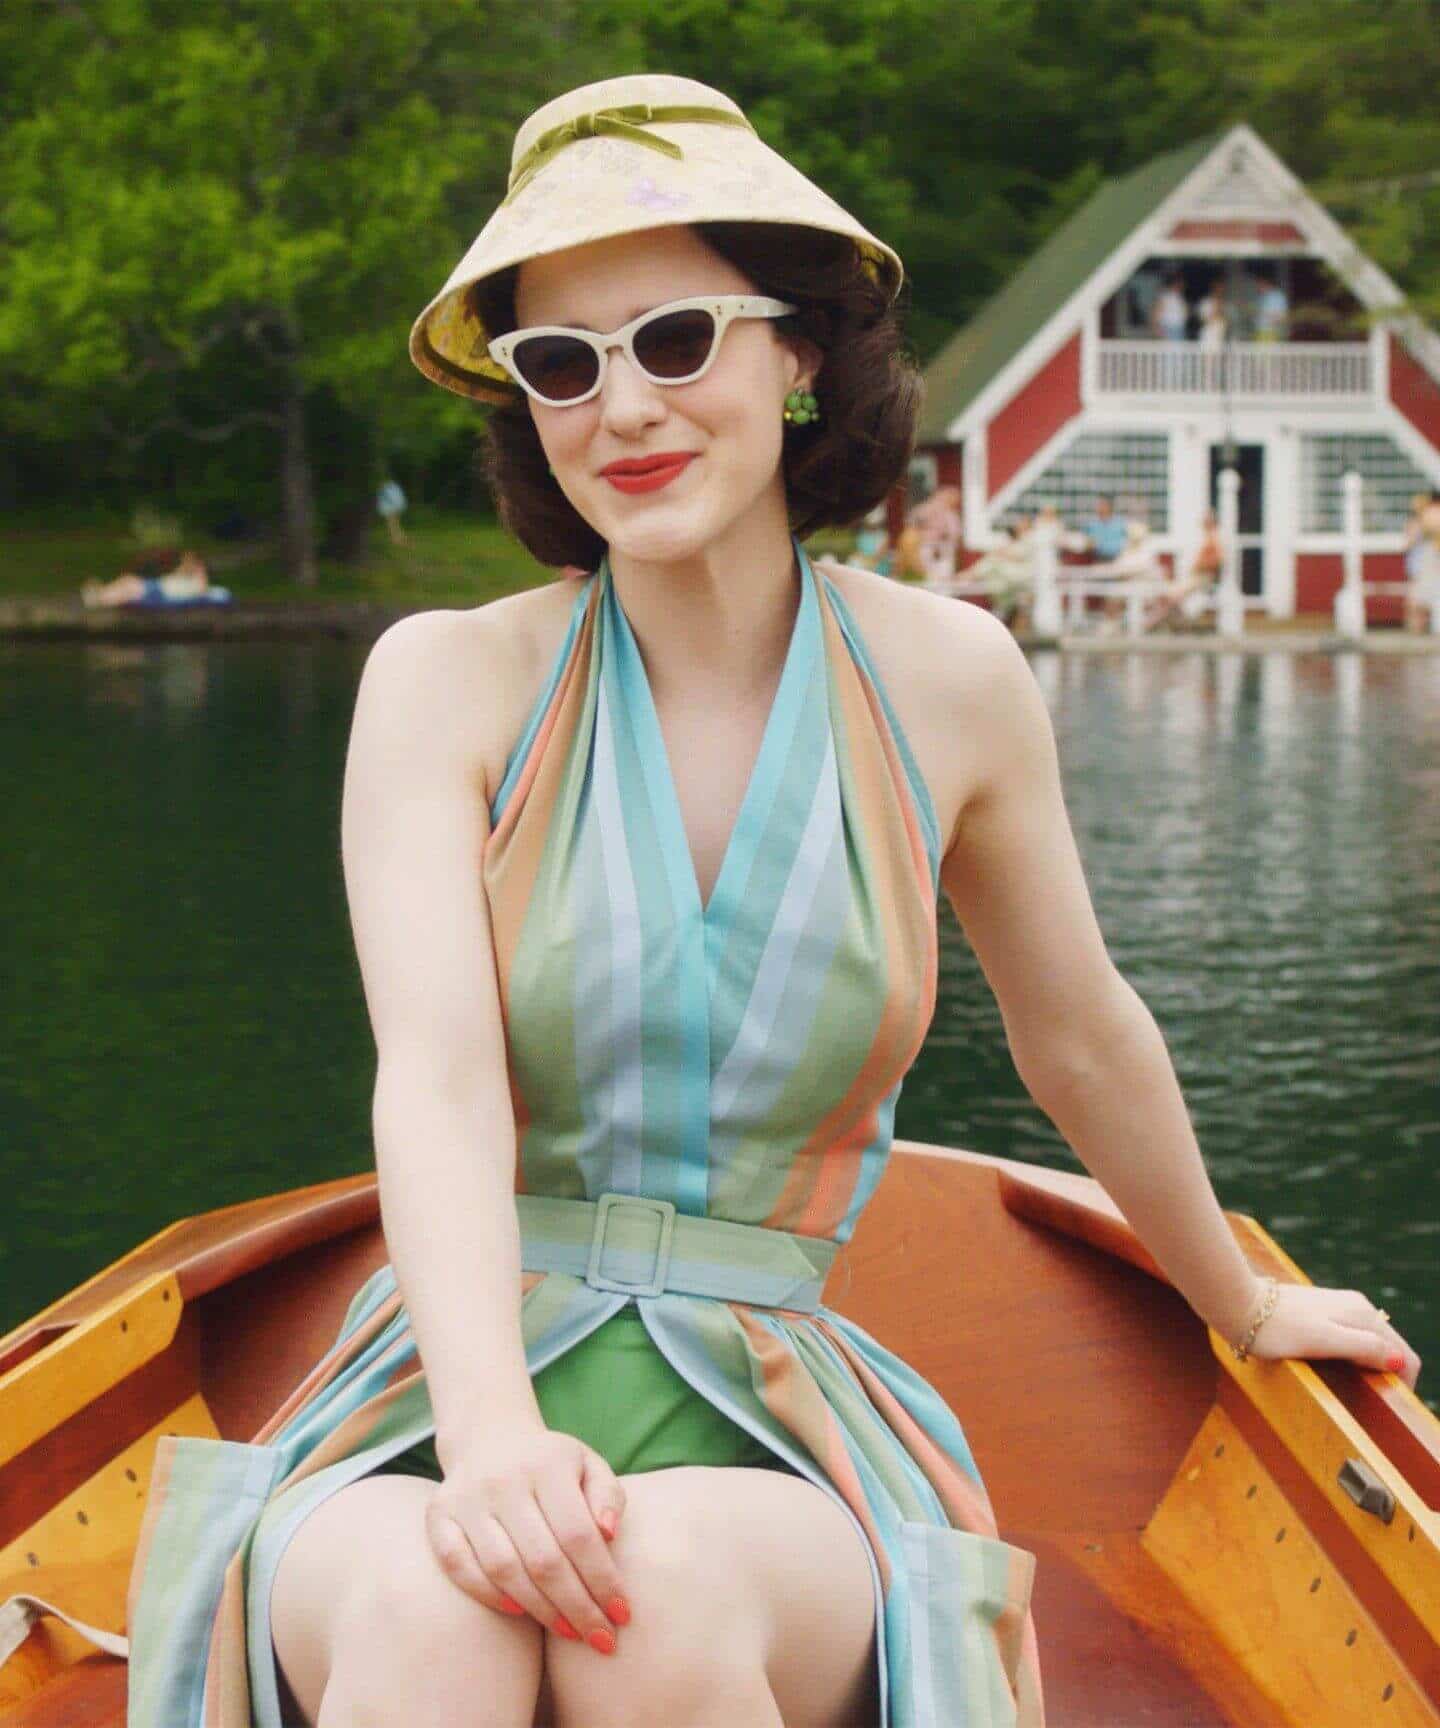 Rachel Brosnahan wearing bold cat-eye sunglasses in The Marvelous Mrs. Maisel with a white hat and colourful dress